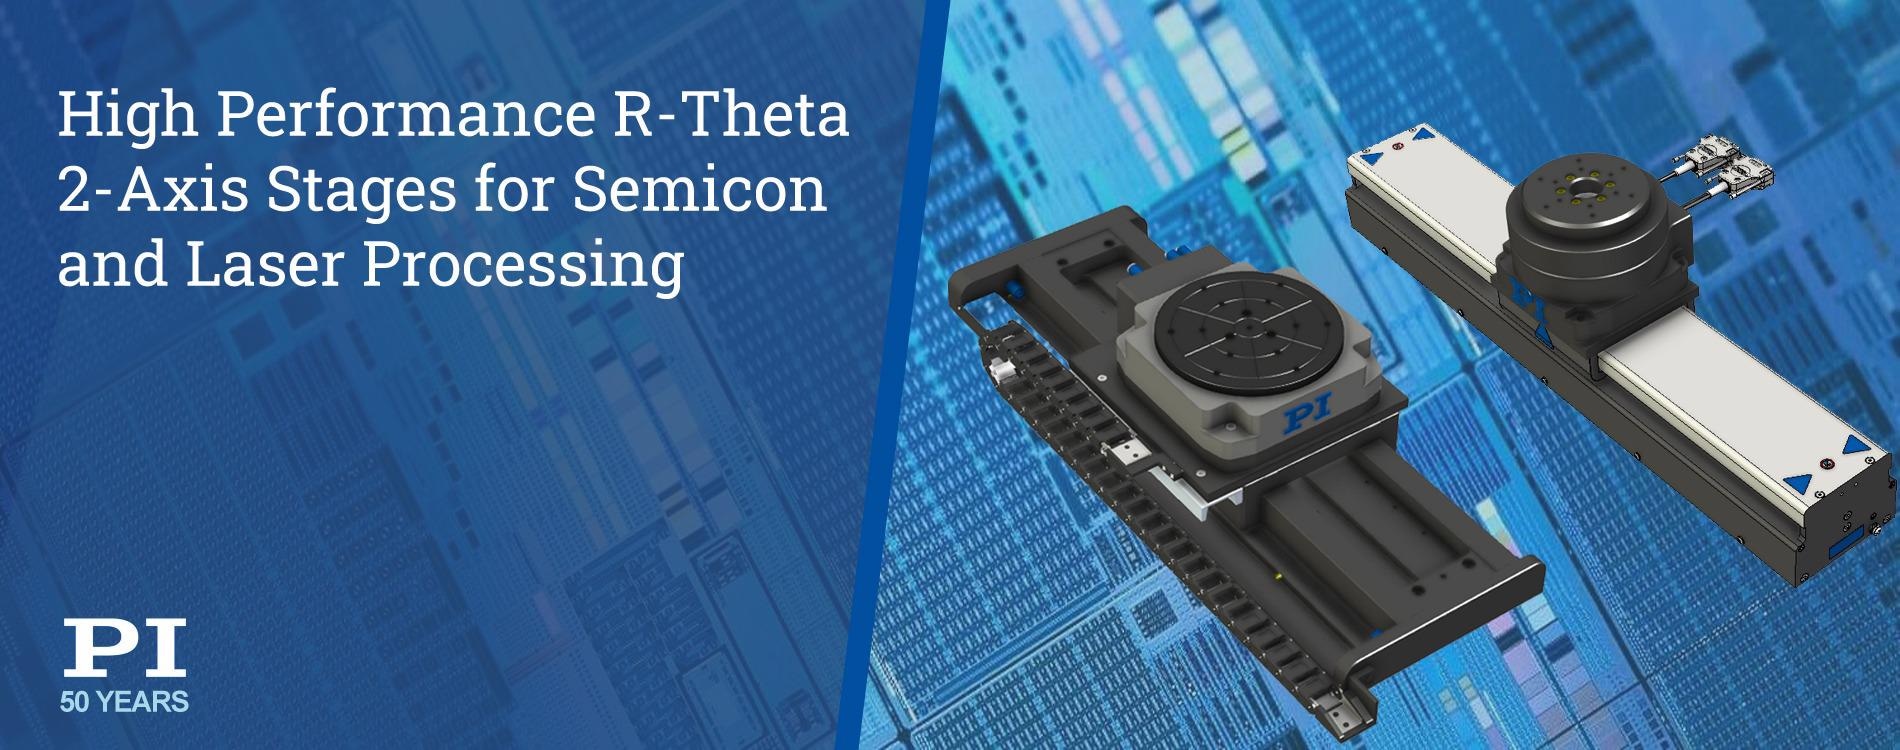 High Performance R-Theta 2-Axis Stages for Nanometer Precision Motion in Semiconductor and Laser Processing Applications